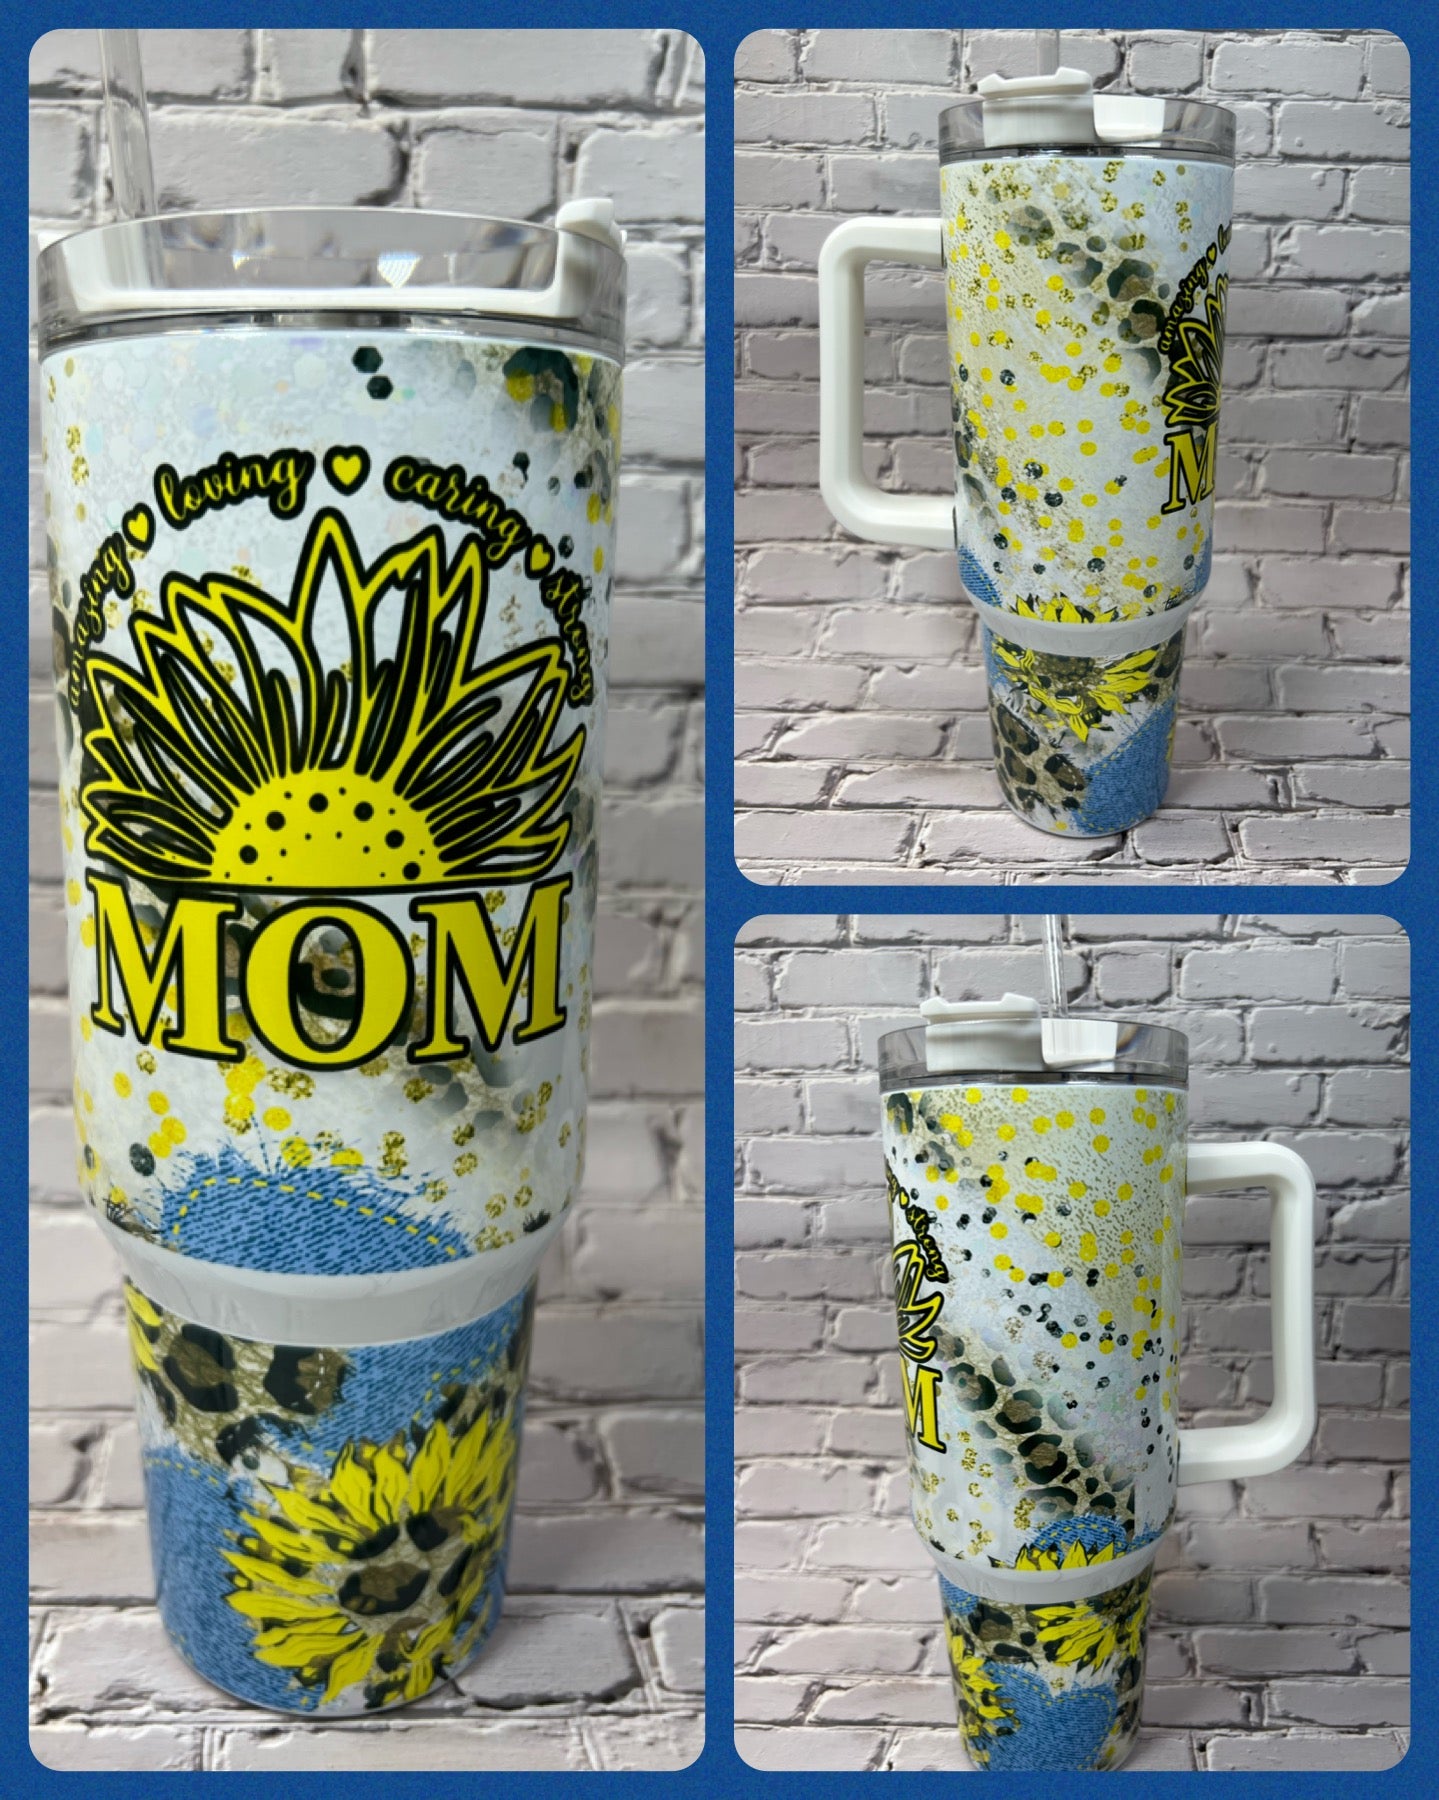 40oz Jumbo Tumbler | Removable Handle | Sublimation | Sold in Individuals & Packs